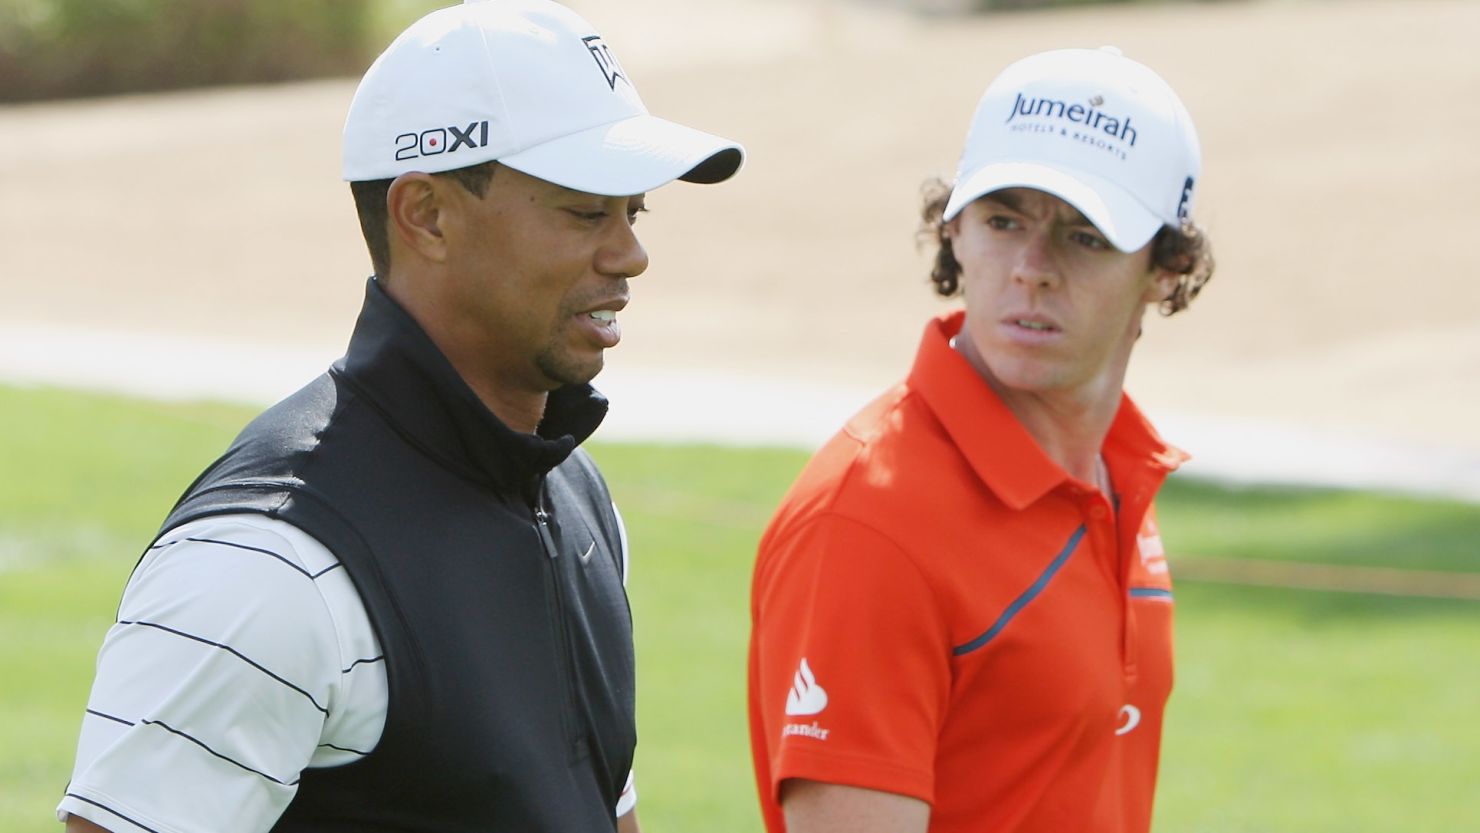 Rory McIlroy (right) will play with Tiger Woods in the opening two rounds of the Abu Dhabi Golf Championship.